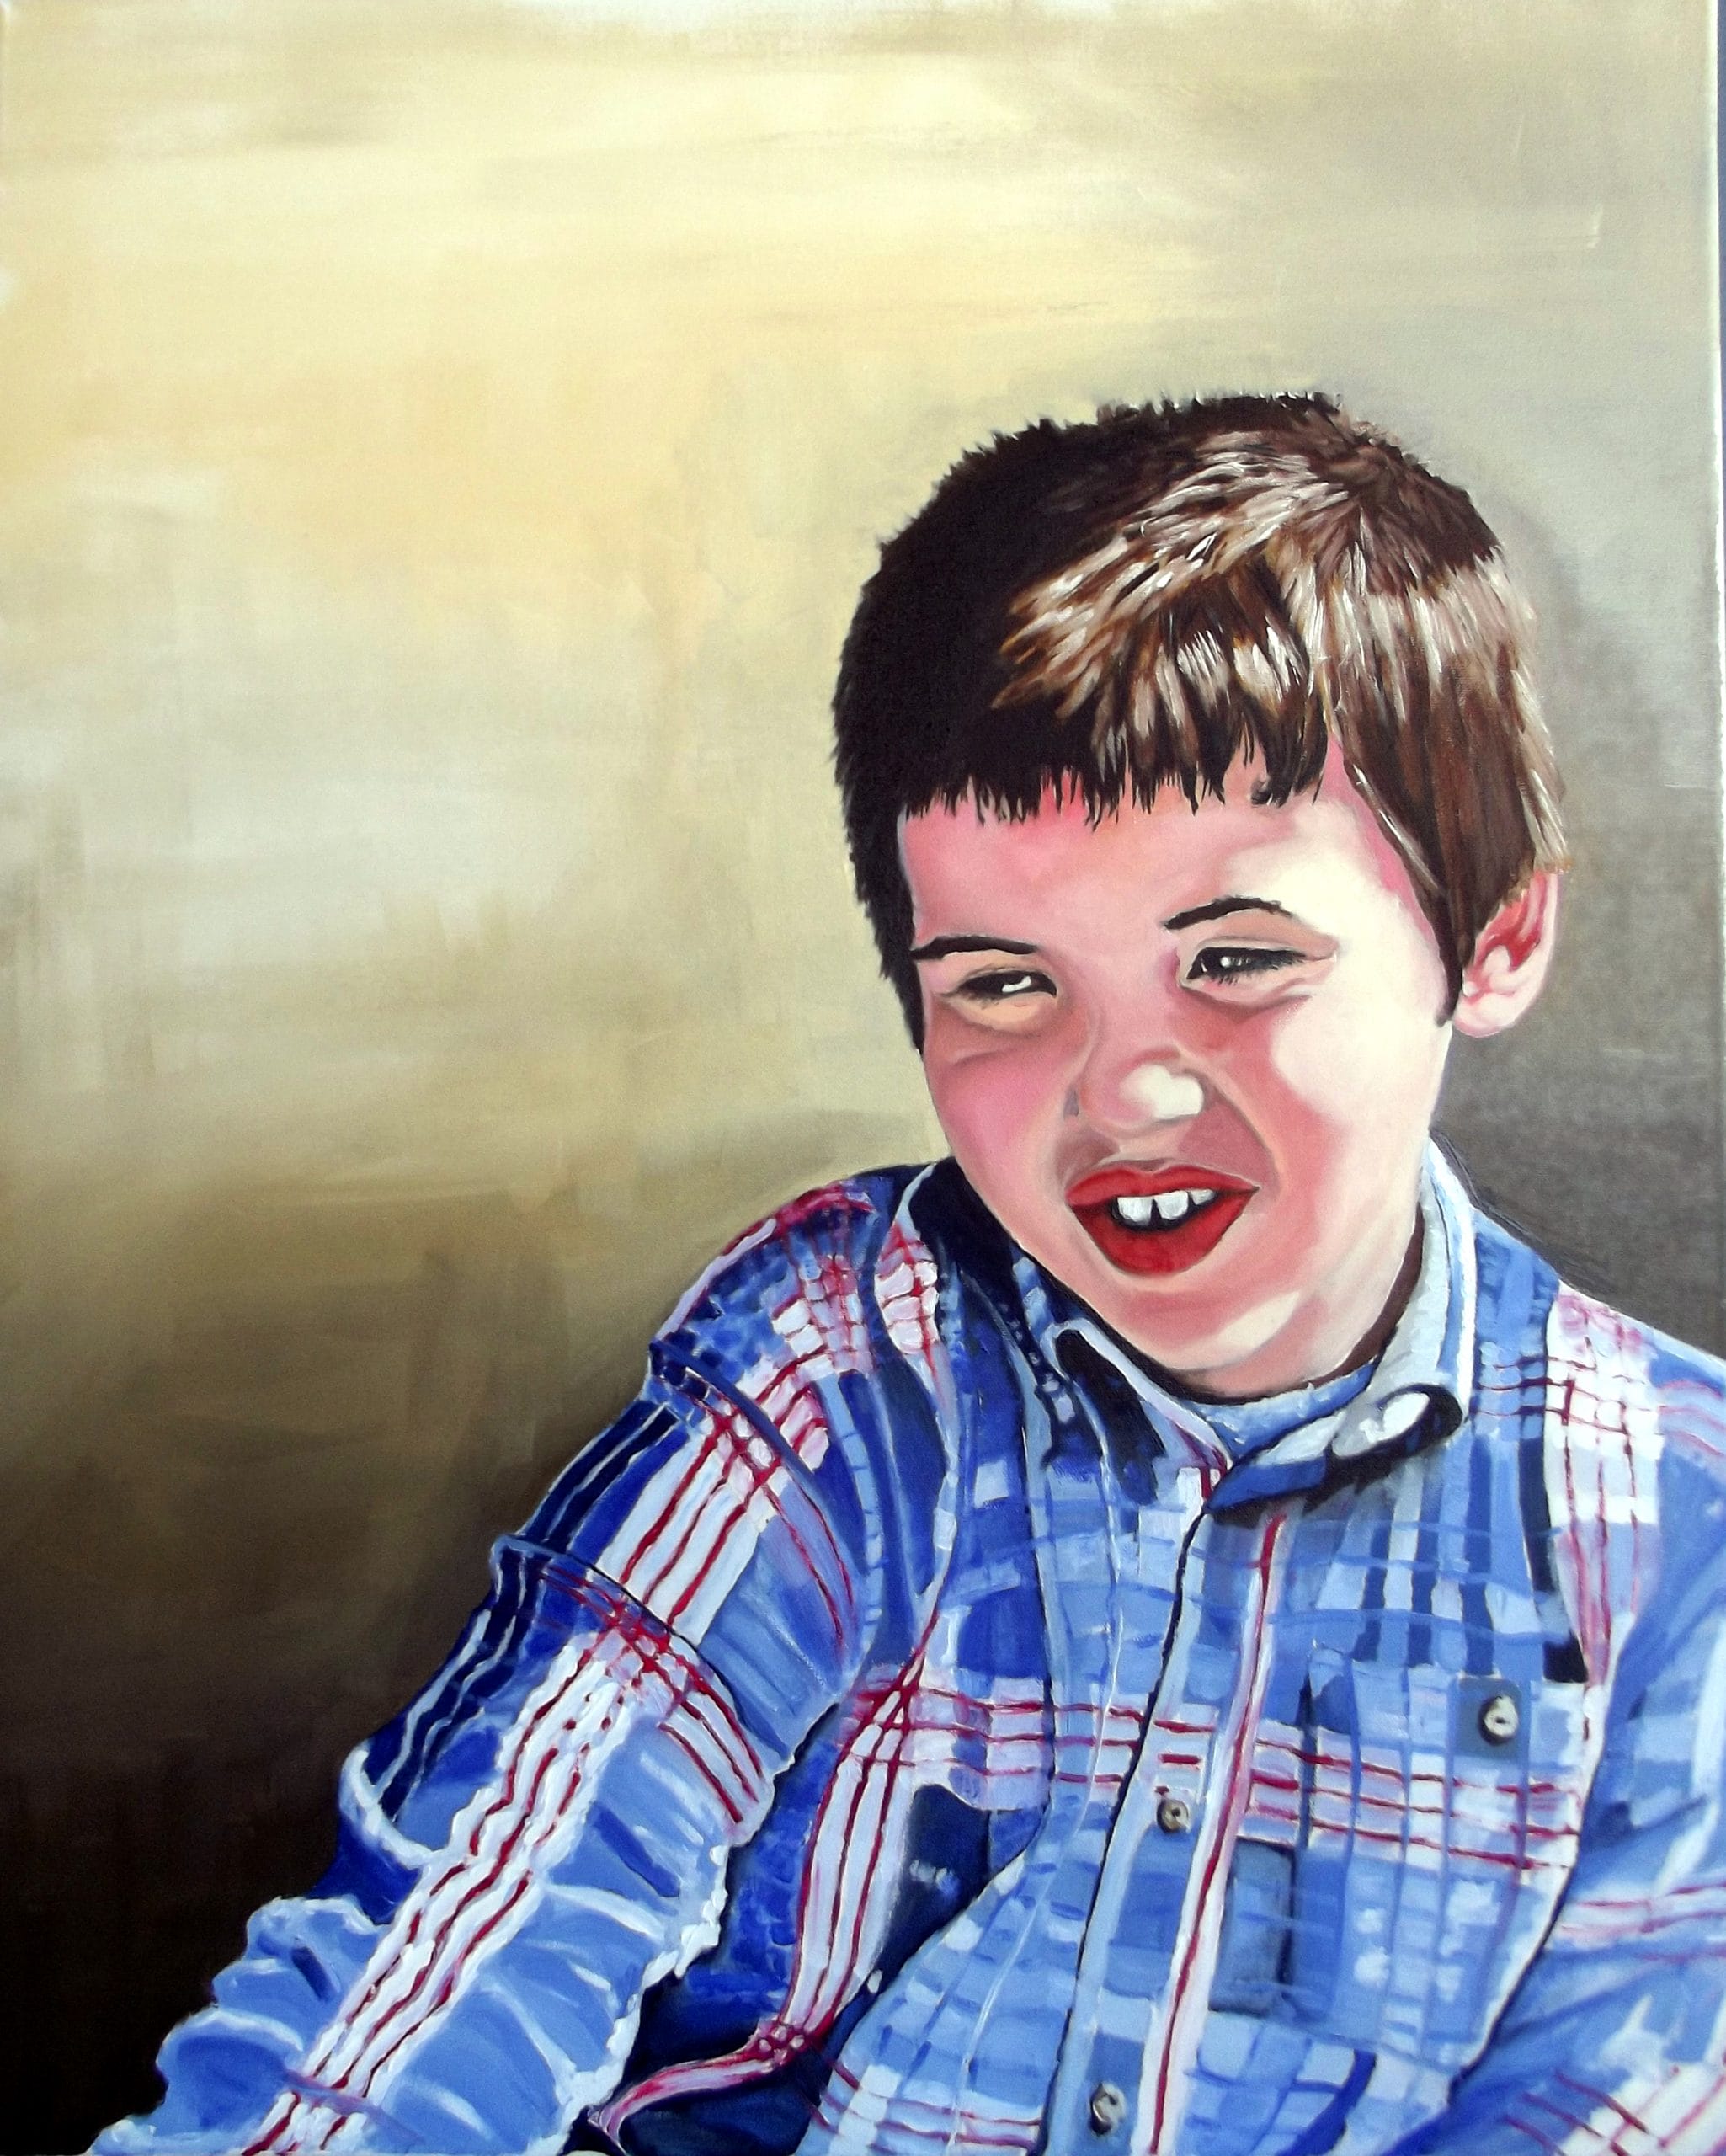 oil painting of a boy from photo